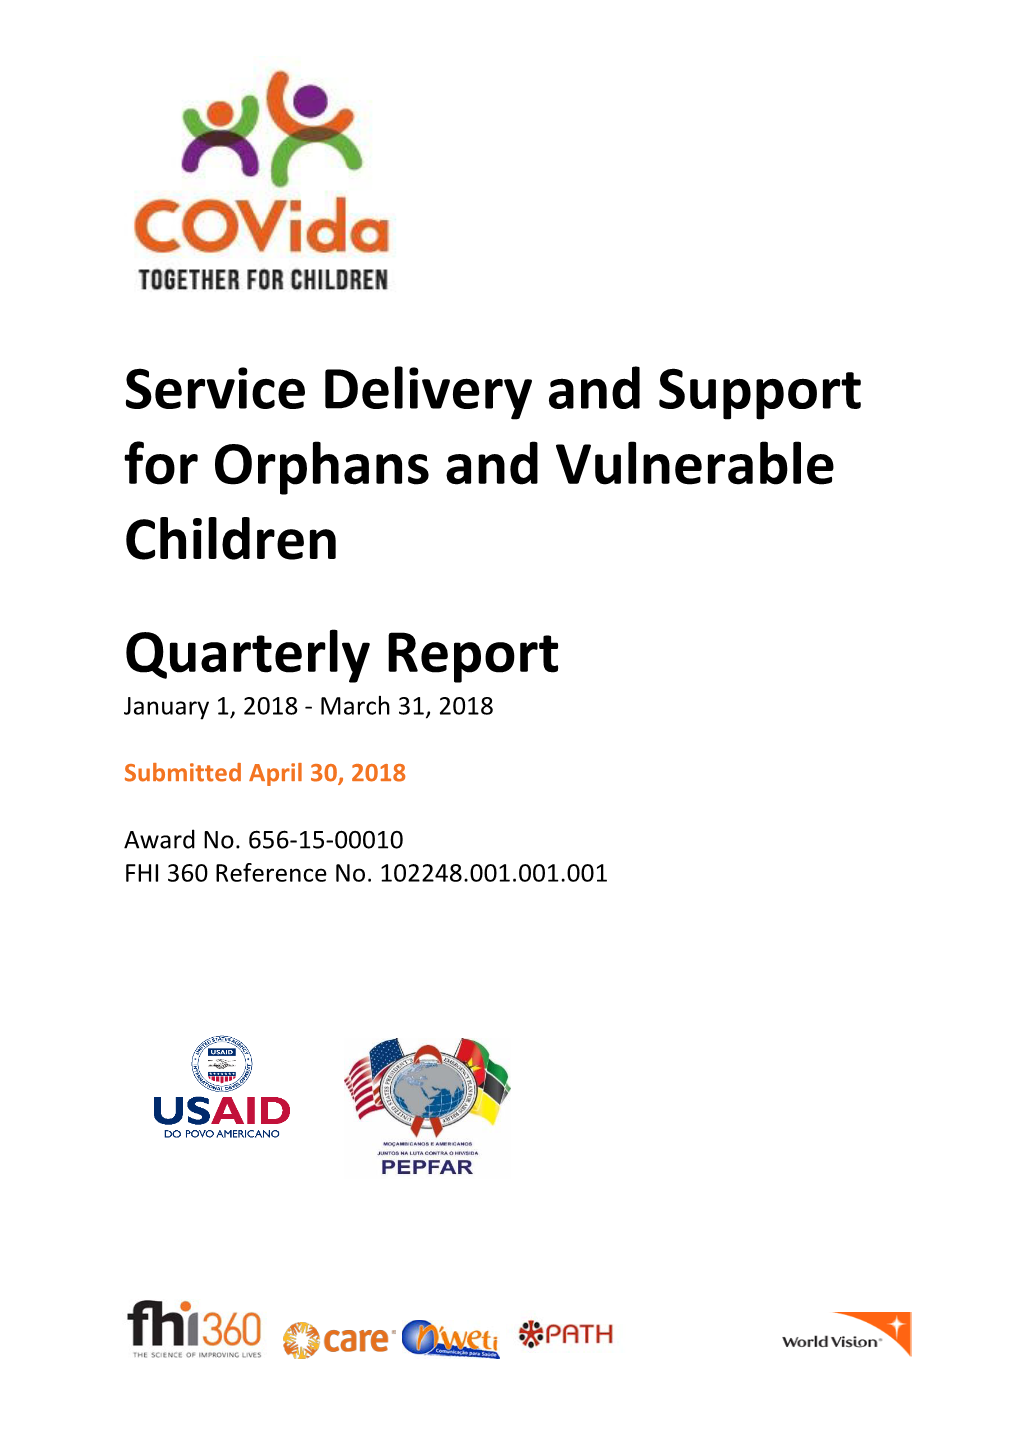 Service Delivery and Support for Orphans and Vulnerable Children